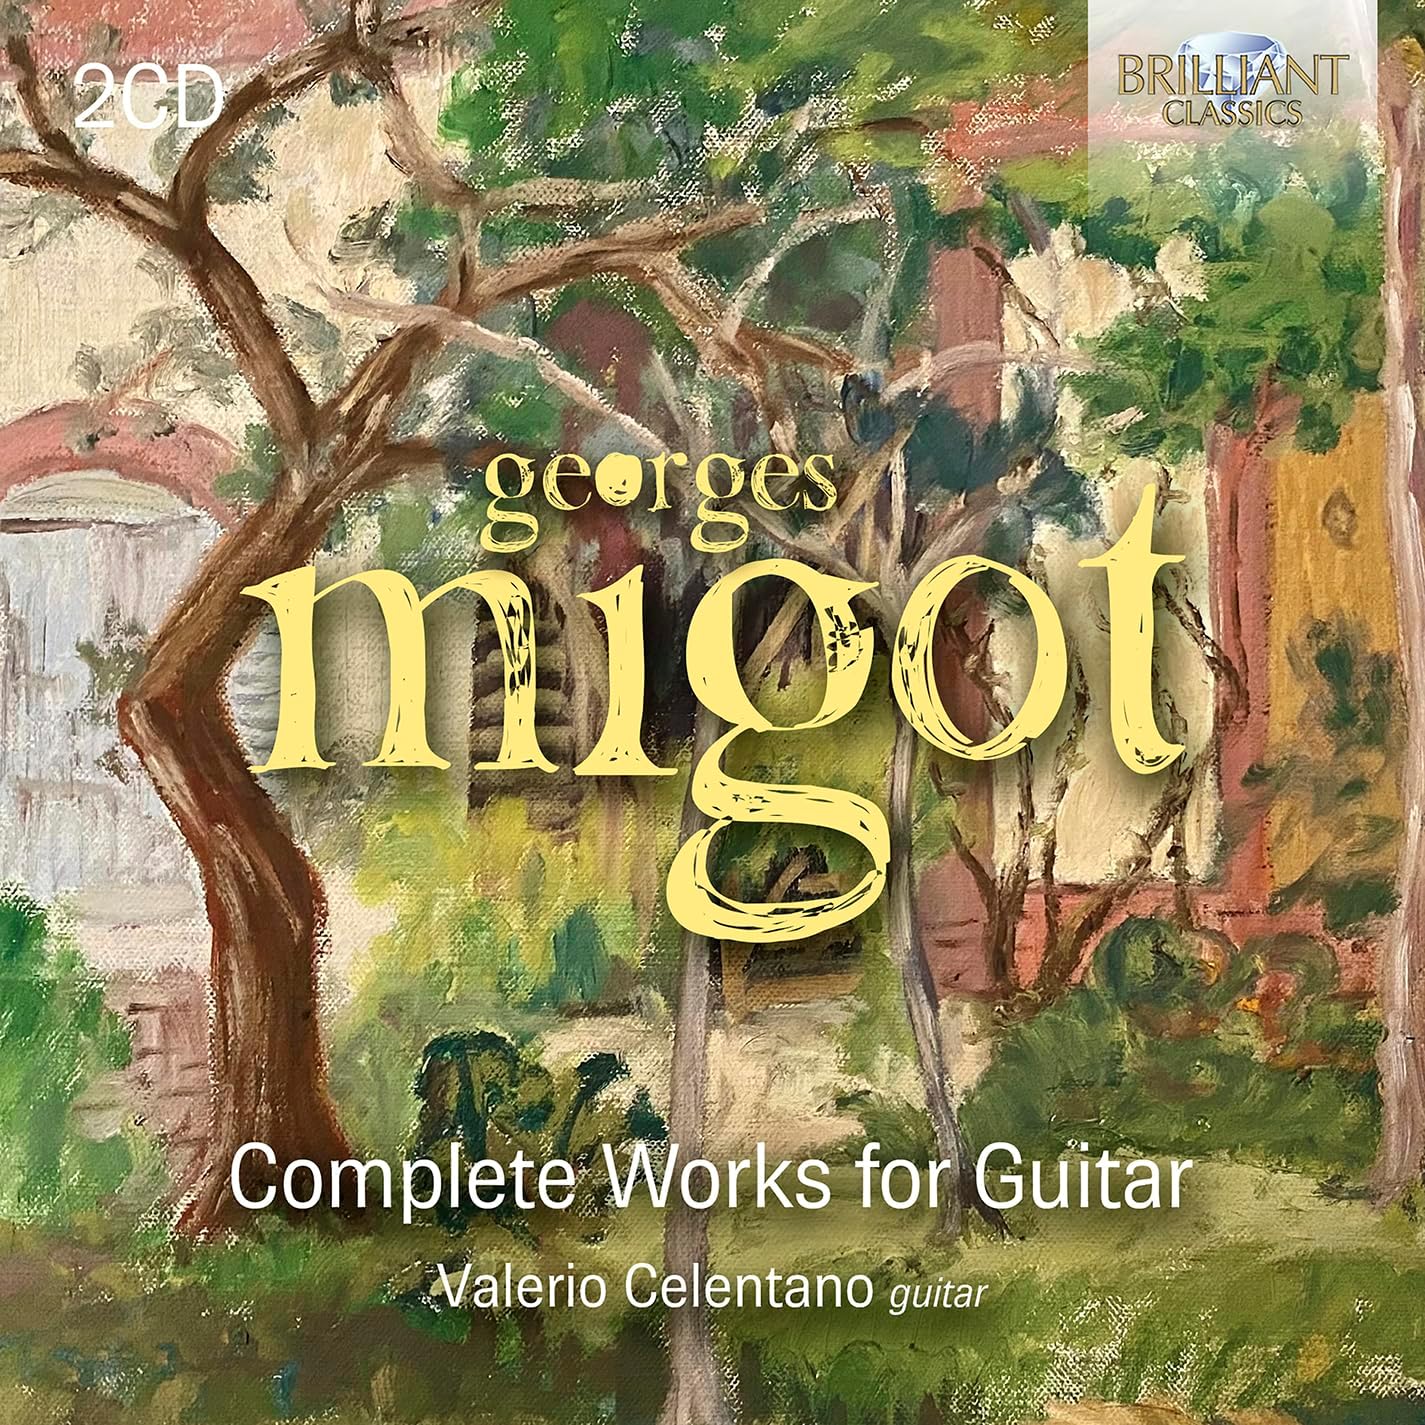 MIGOT: COMPLETE WORKS FOR GUITAR (2CDS)